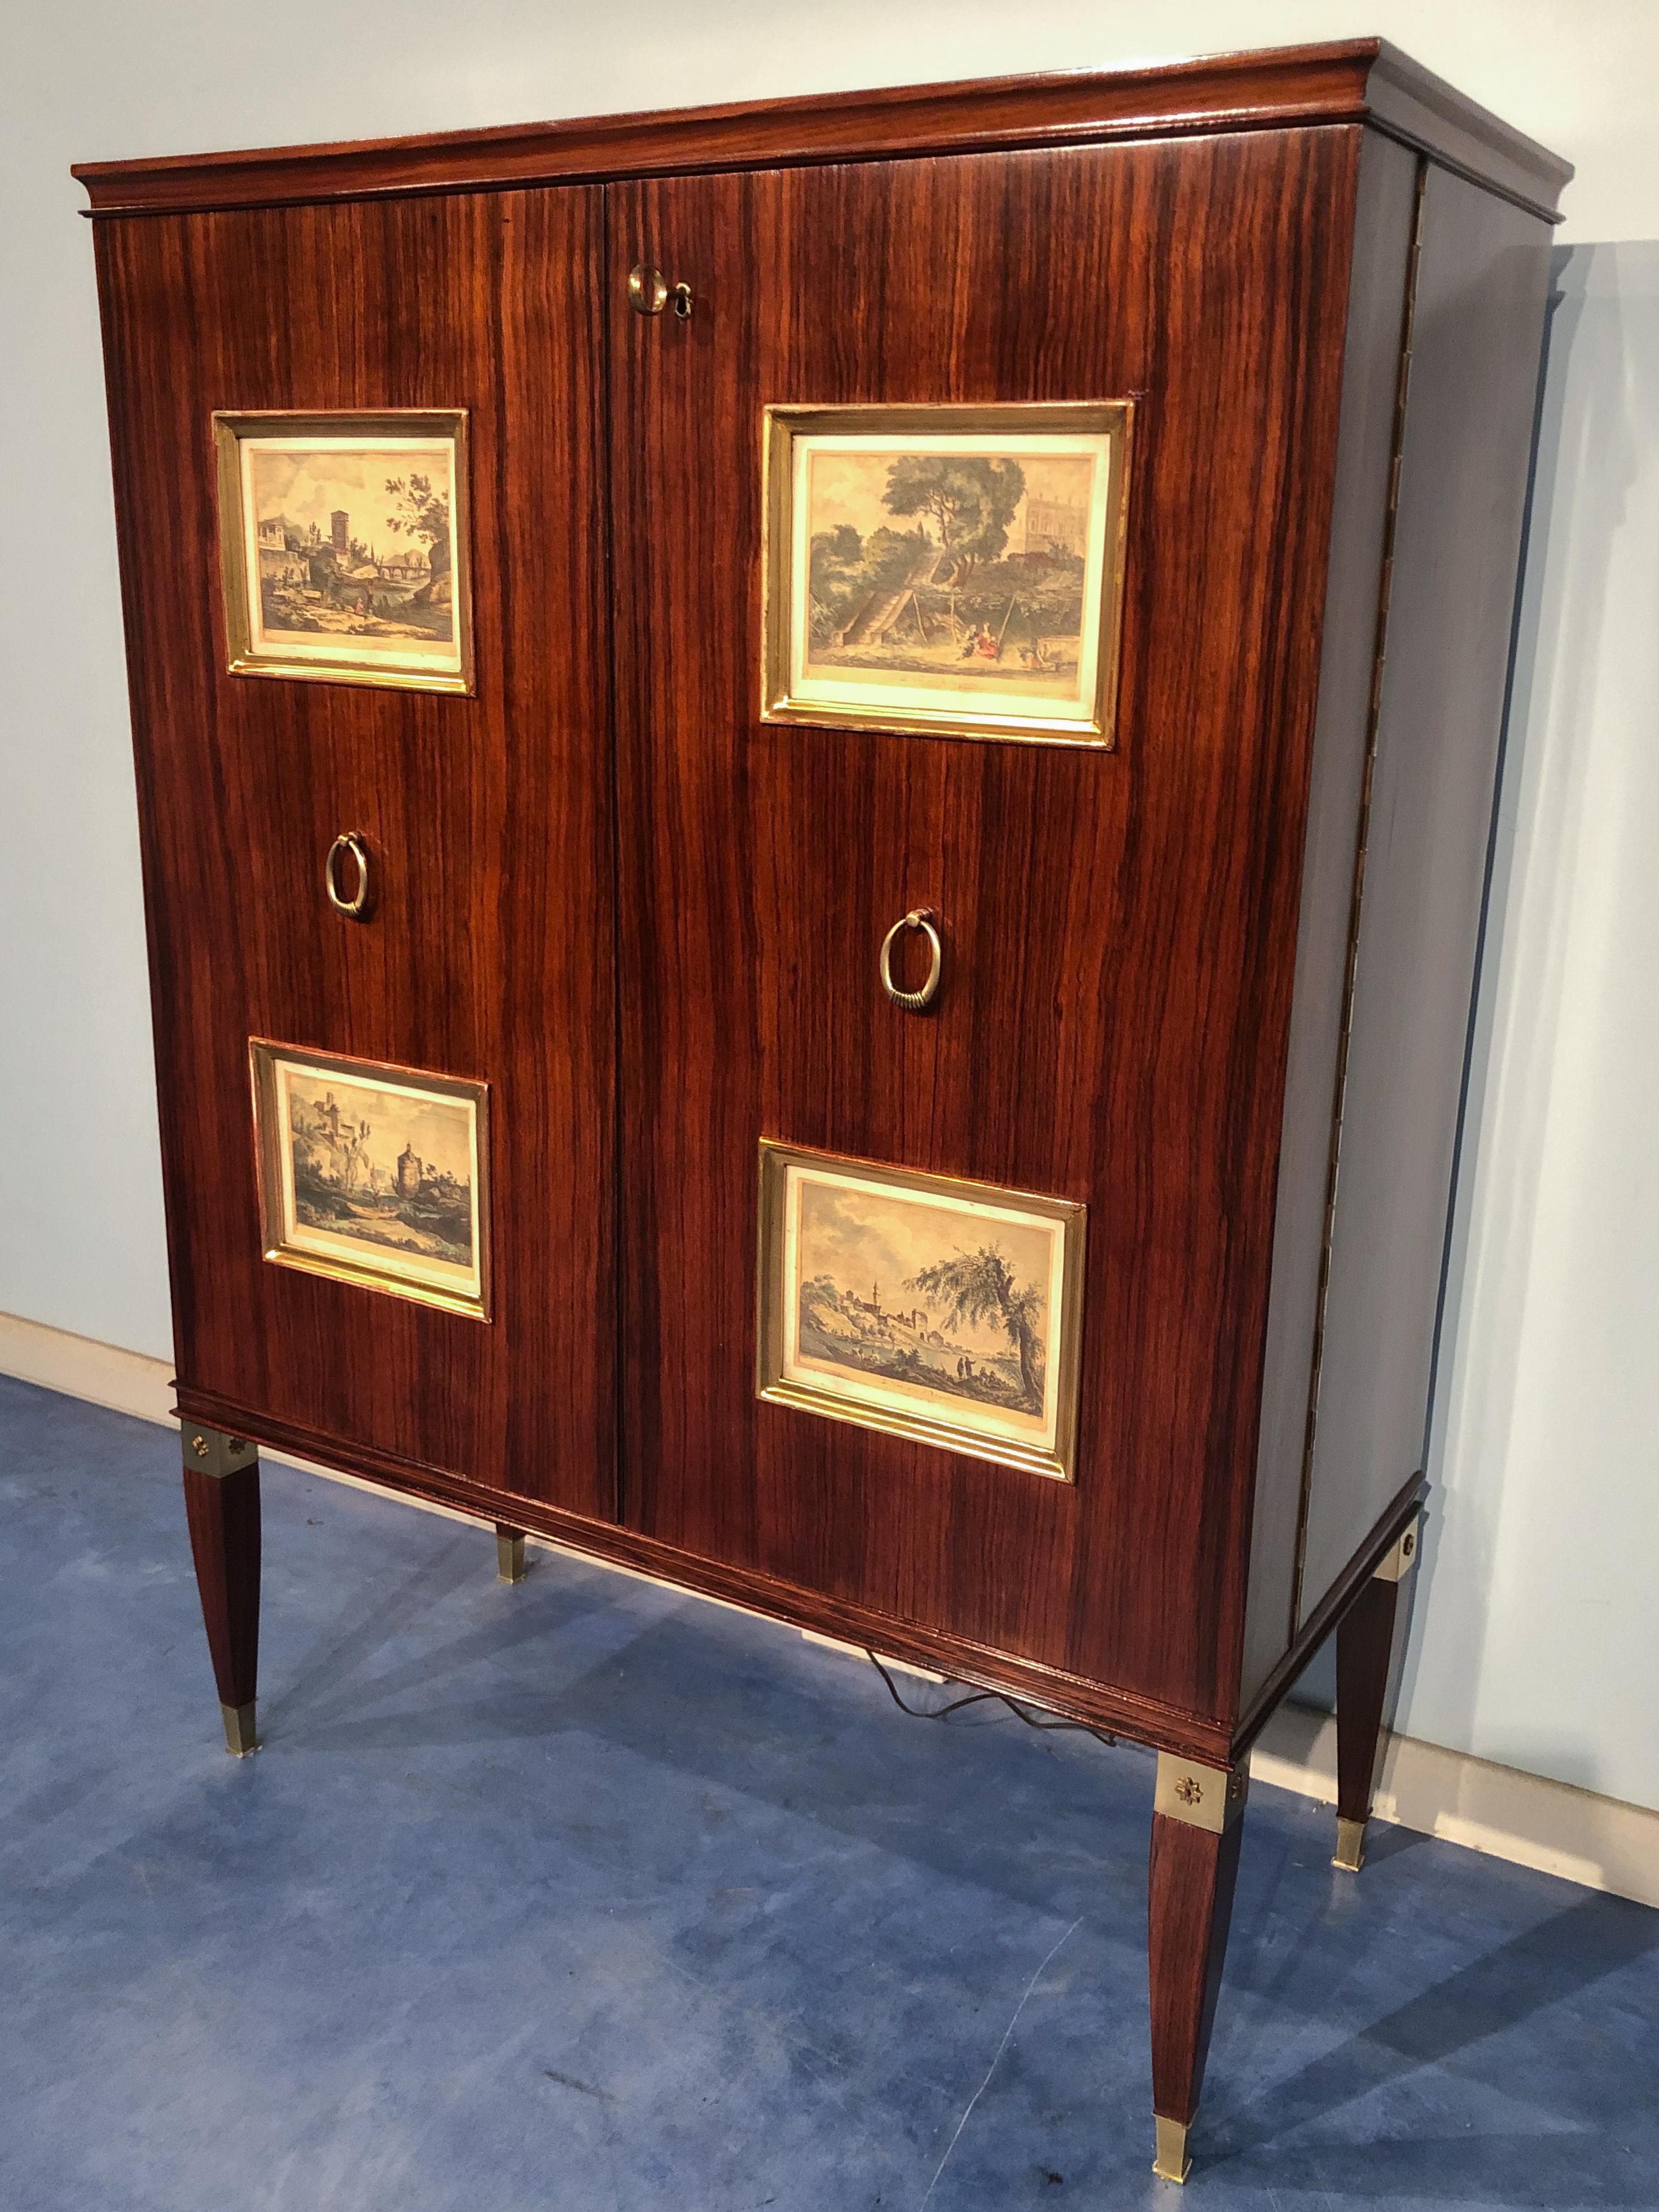 Italian mid-century cabinet bar or sideboard designed by Paolo Buffa in the 1950s. On the front doors, you find four giltwood panels, inserted with 18th-century engravings of classic scenes. The interior has drawers and mirrored shelves with stars